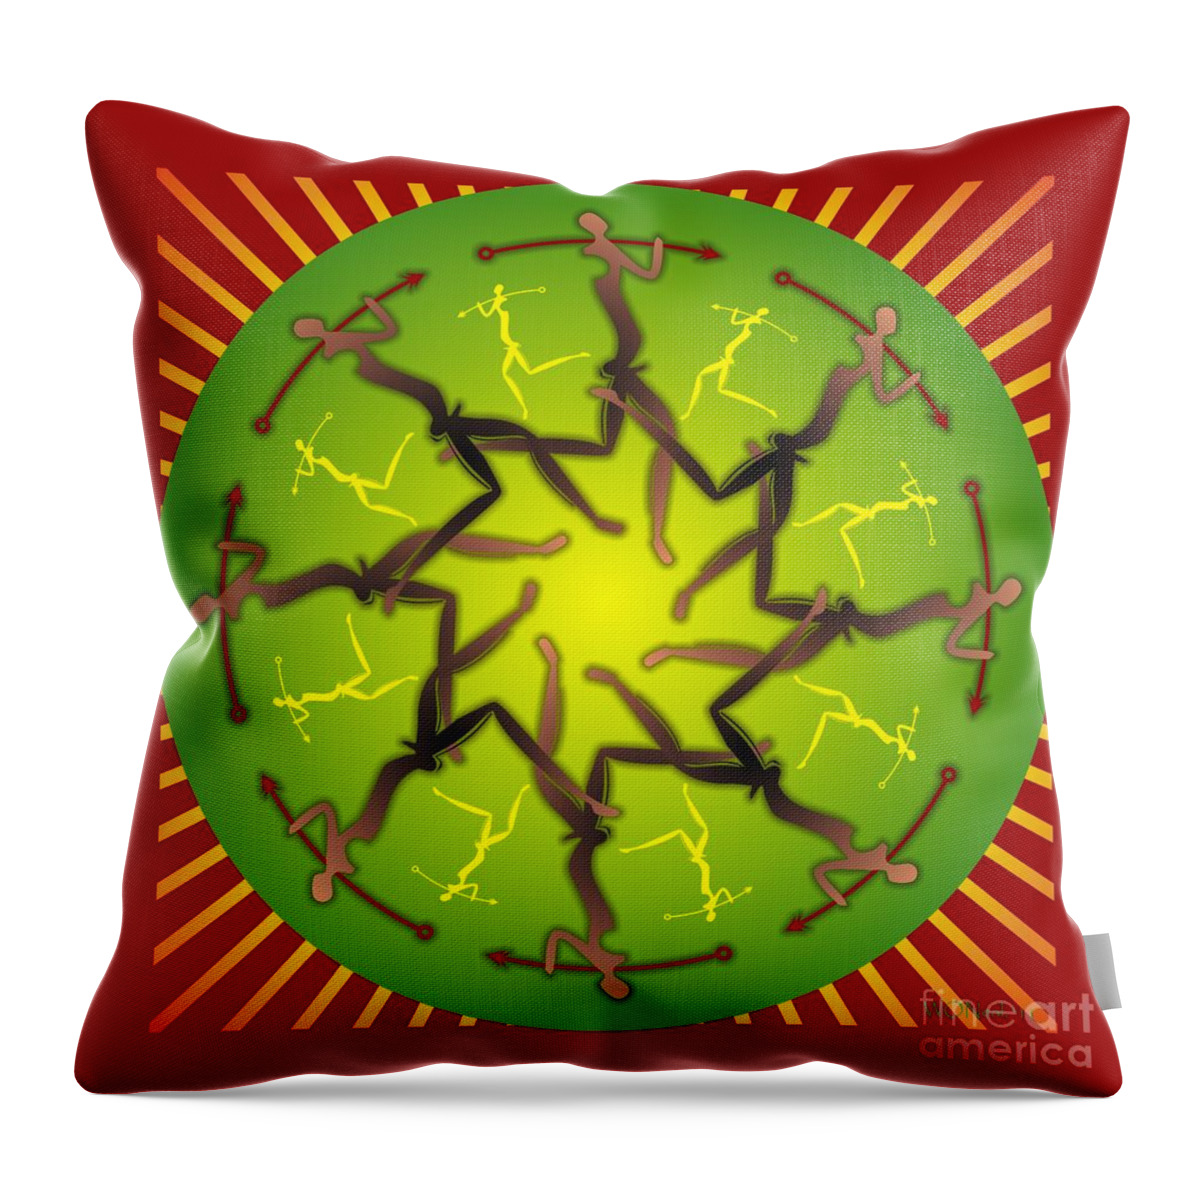 Figures Throw Pillow featuring the digital art Tribal Warriors by Walter Neal